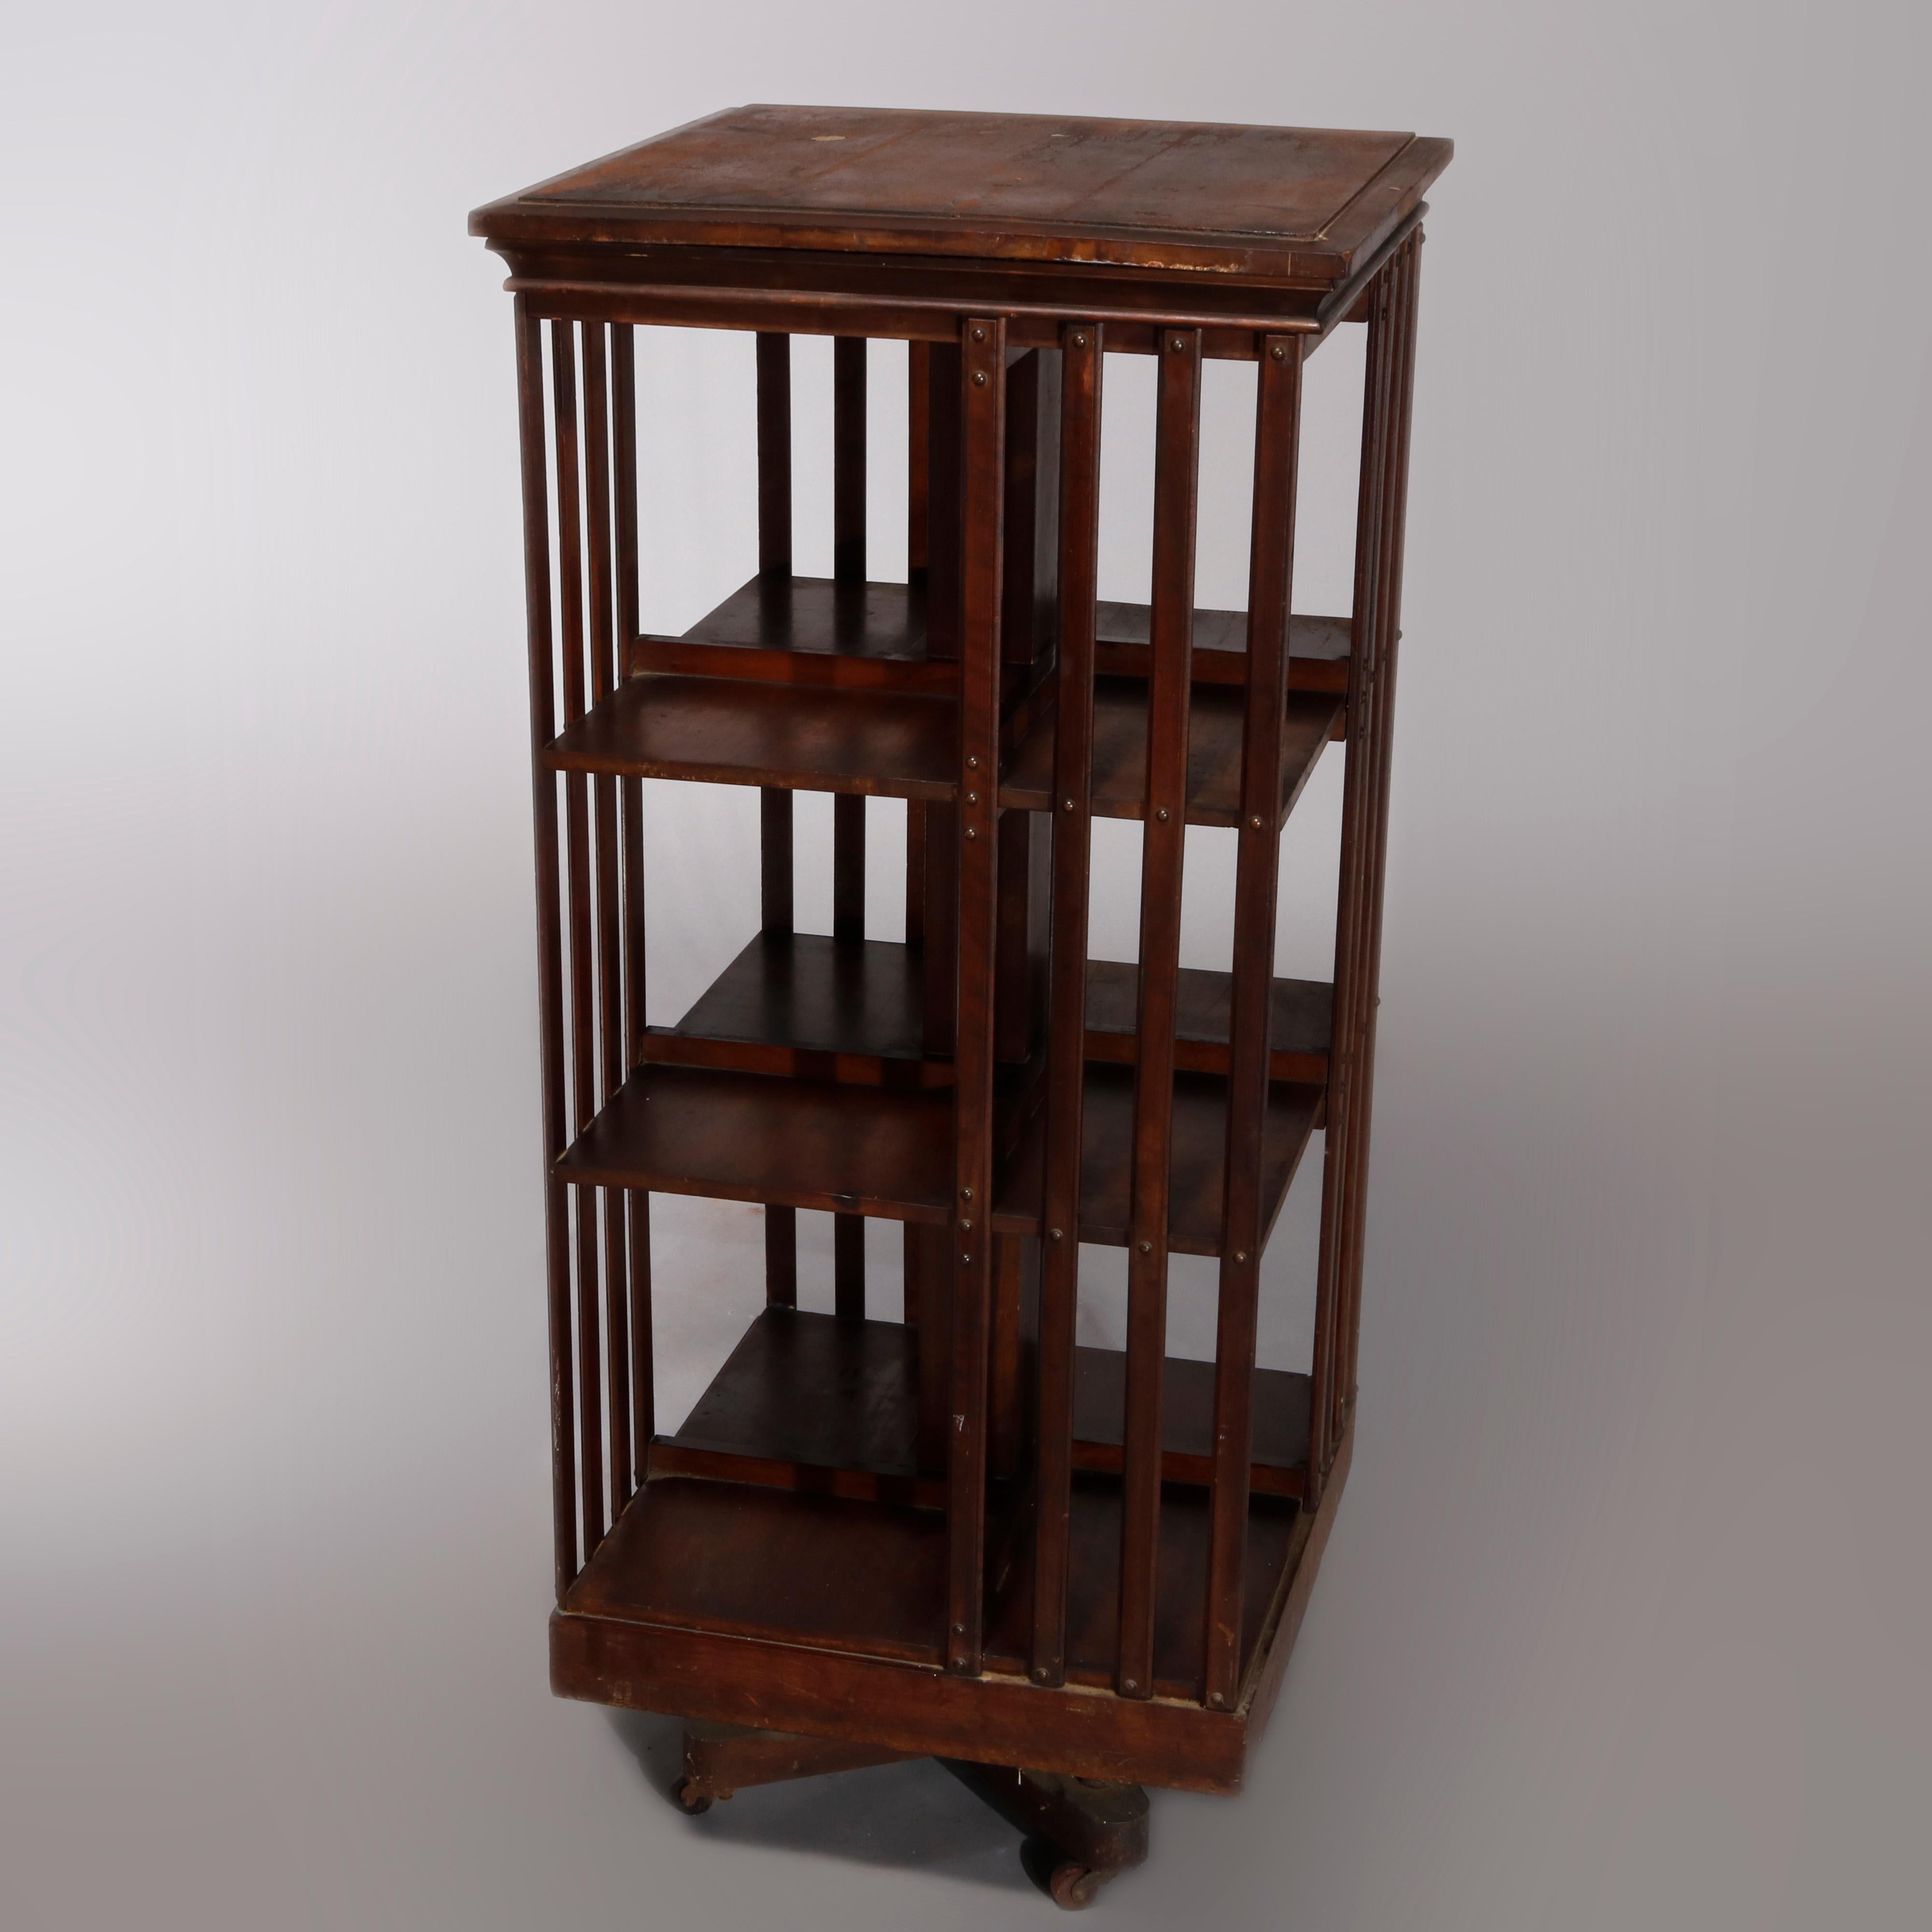 Antique Arts & Crafts Mission oak bookcase by Danner features square form with four shelves and slat sides, bookcase revolves and is seated on quadruped base with wheels, circa 1910.

Measures: 45.5